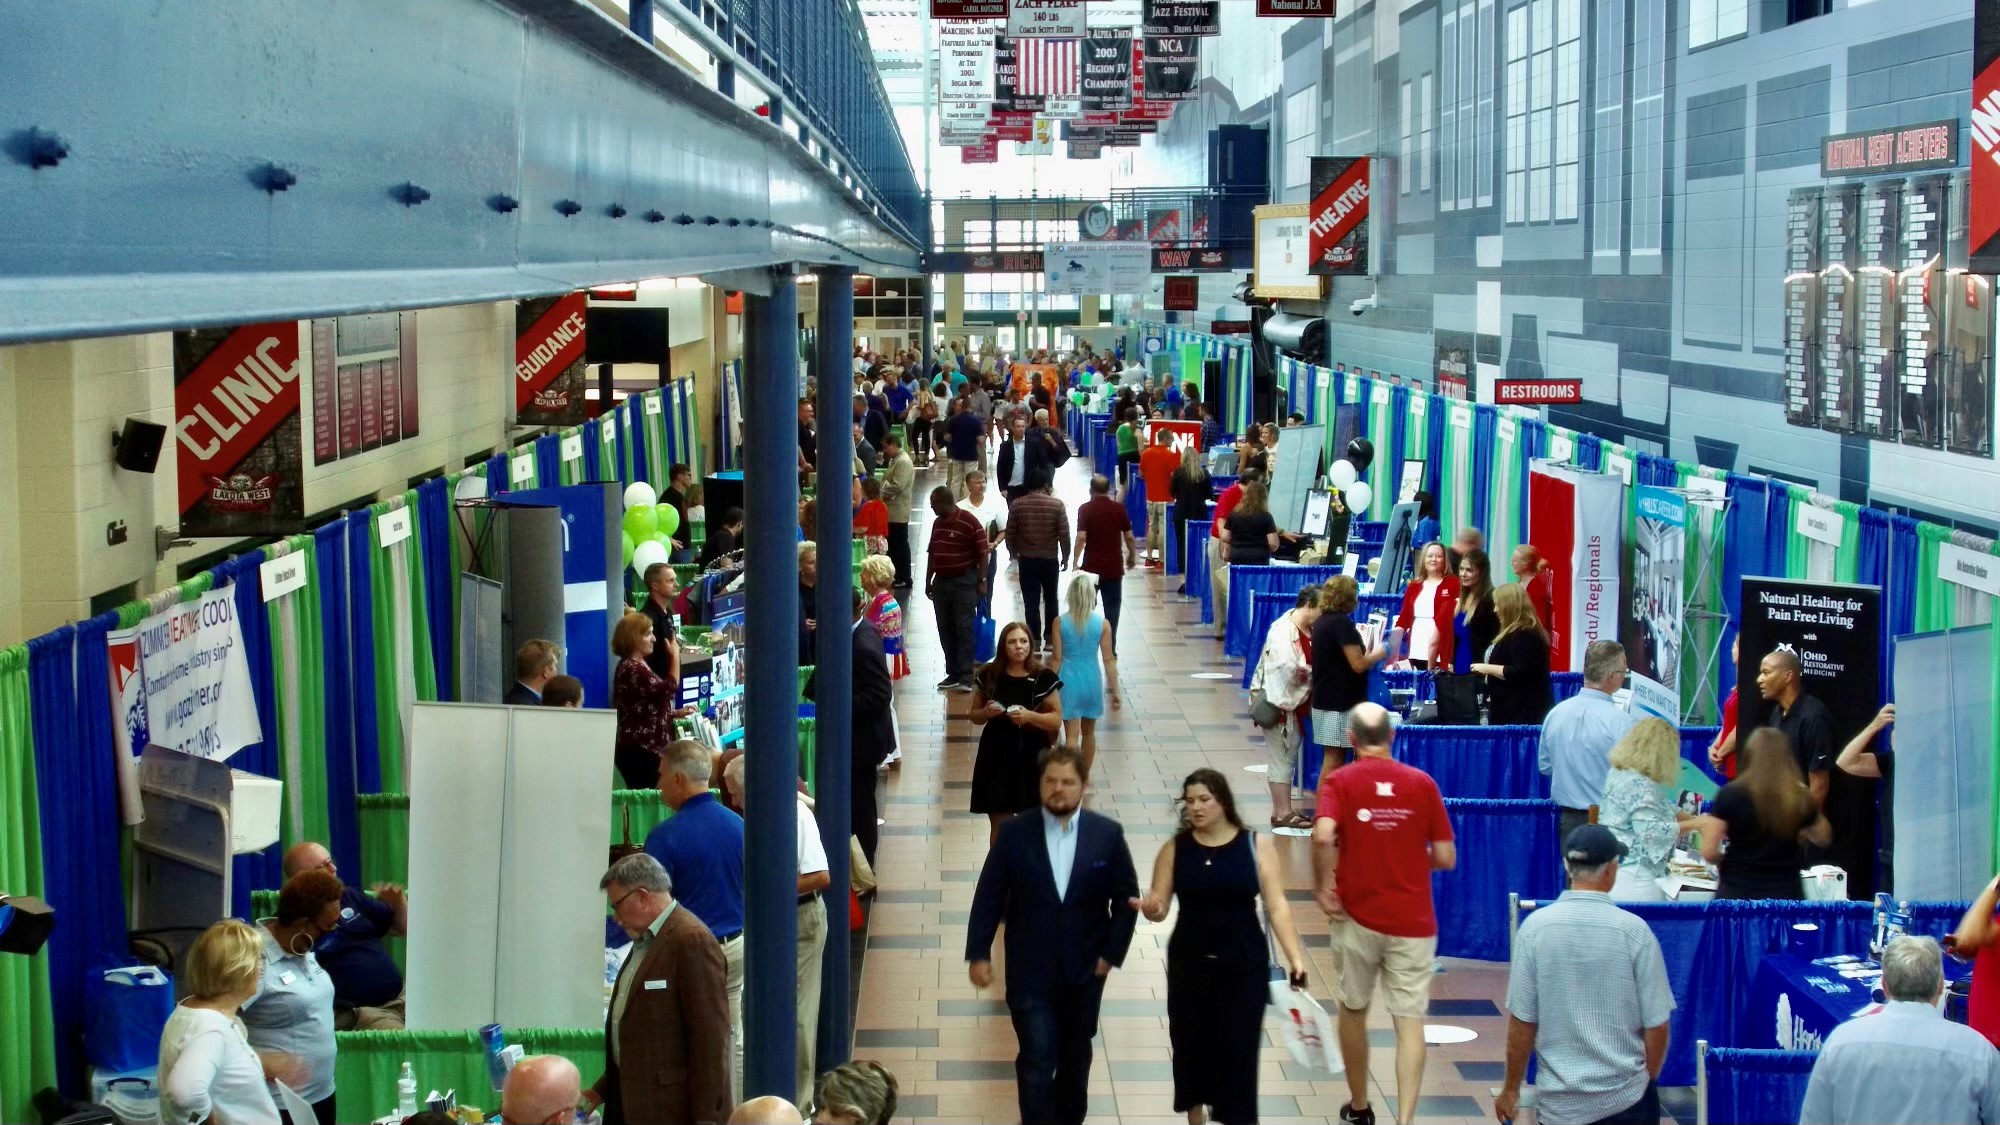 The Regional Business Expo is the largest event between Cincinnati and Dayton for regional businesses to connect. // CONTRIBUTED